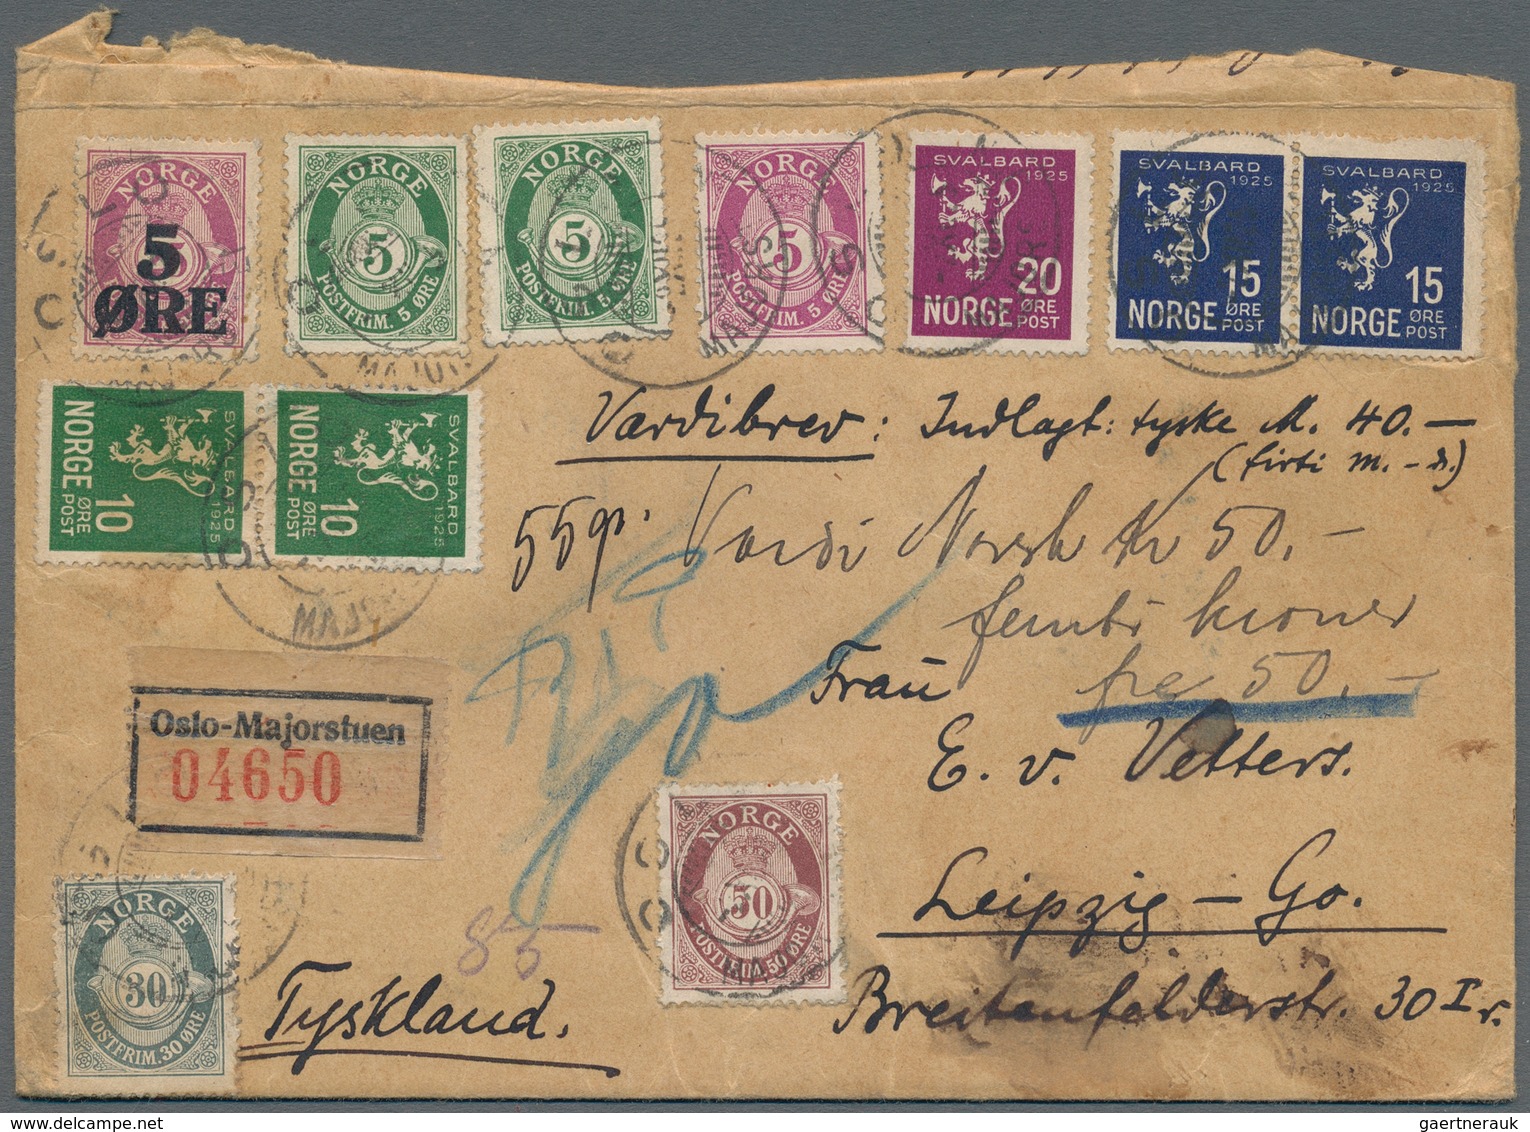 Norwegen: 1925 Value Letter Over 40 Reichsmark With Multicolored Franking From Oslo-Majorstuen To Le - Cartas & Documentos